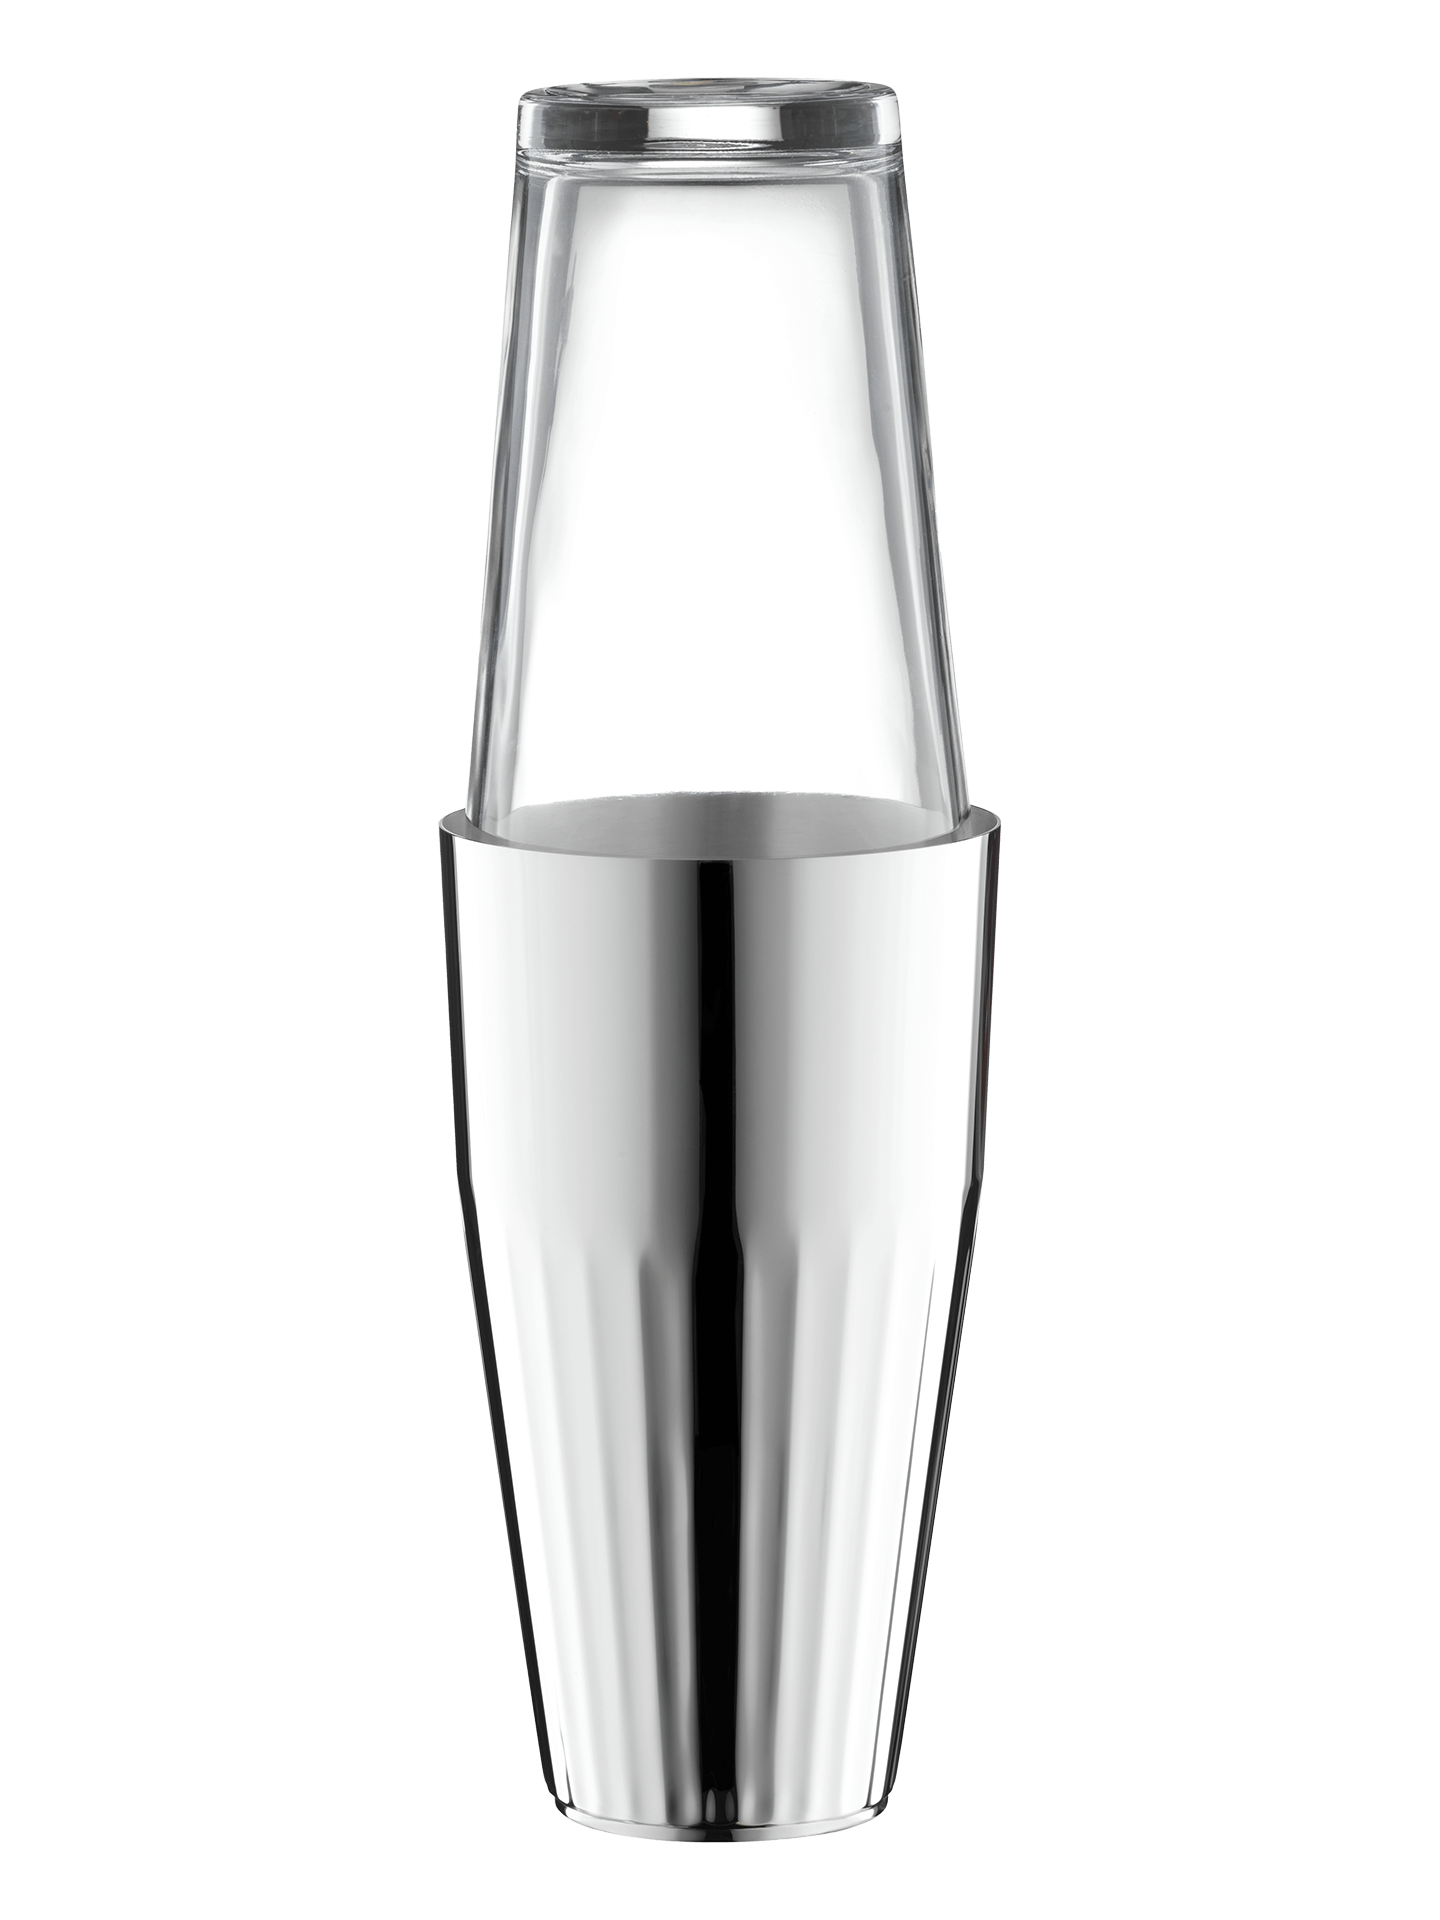 Belvedere Cocktail shaker with glass (90g silverplated)